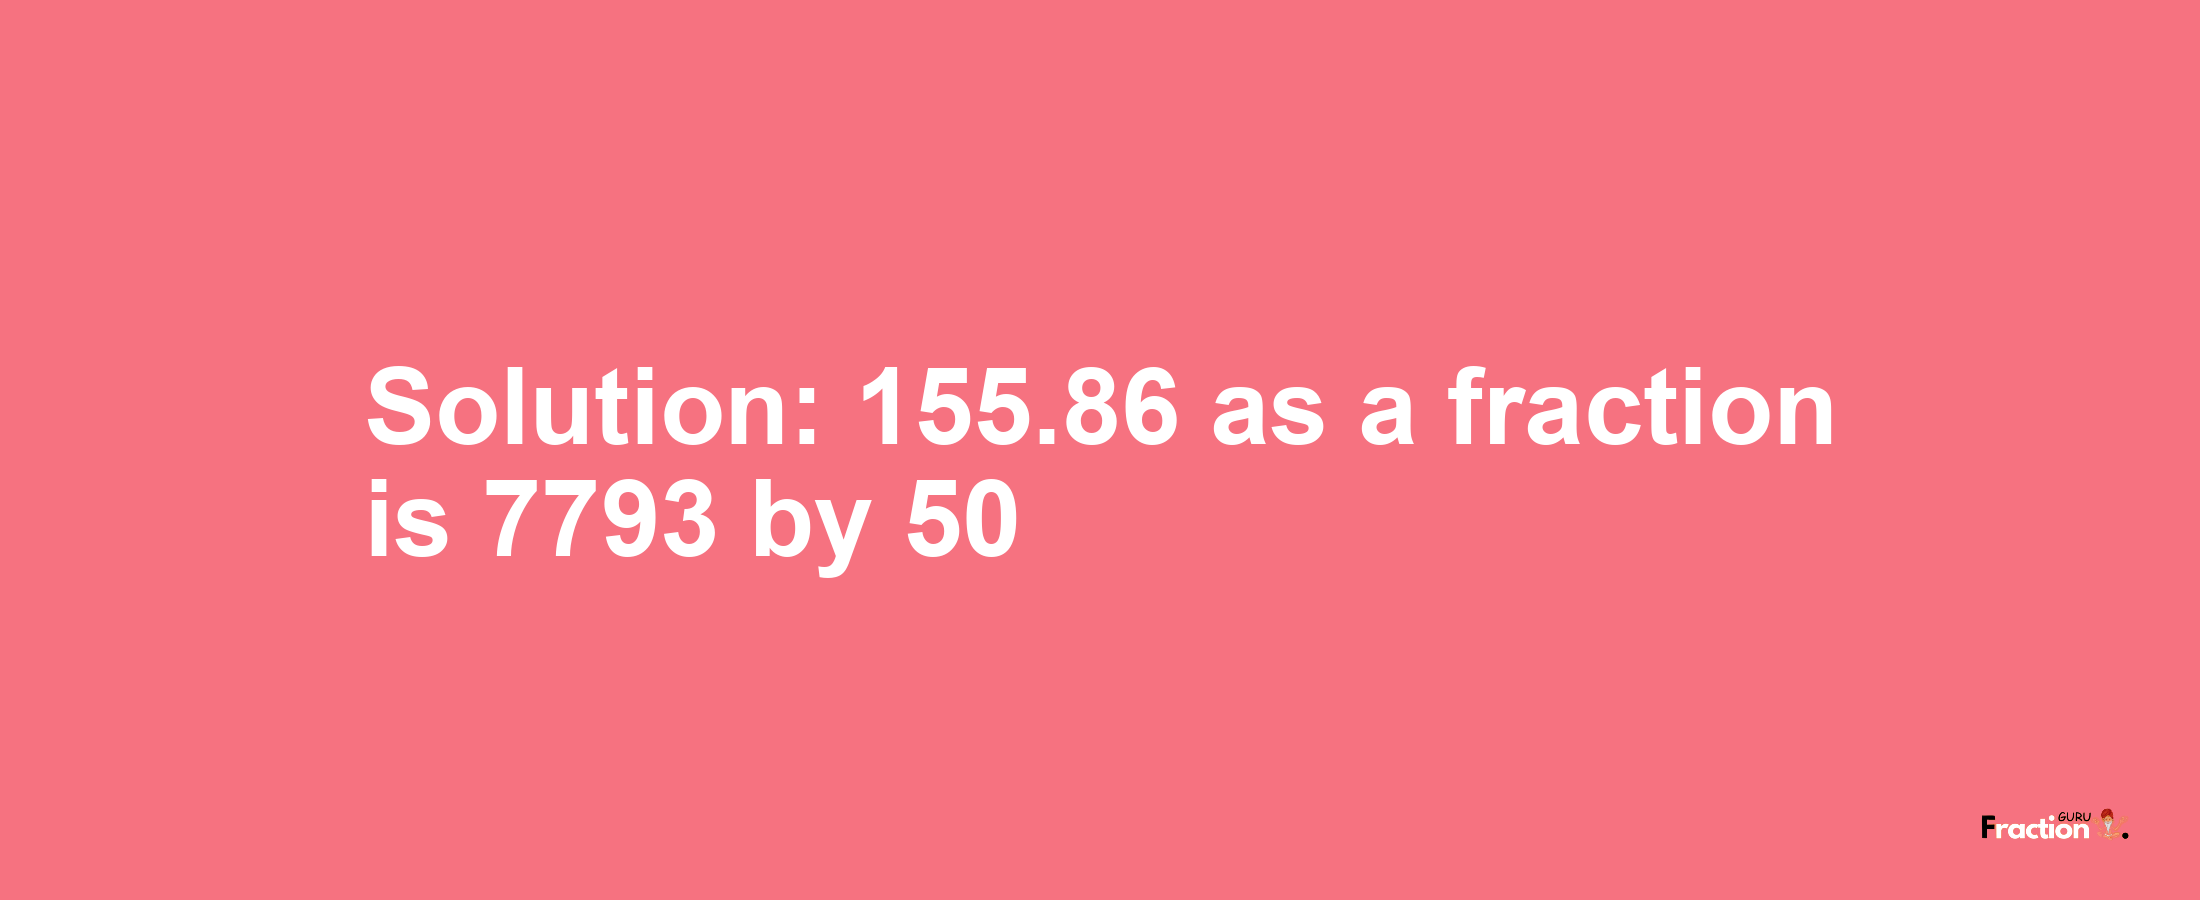 Solution:155.86 as a fraction is 7793/50